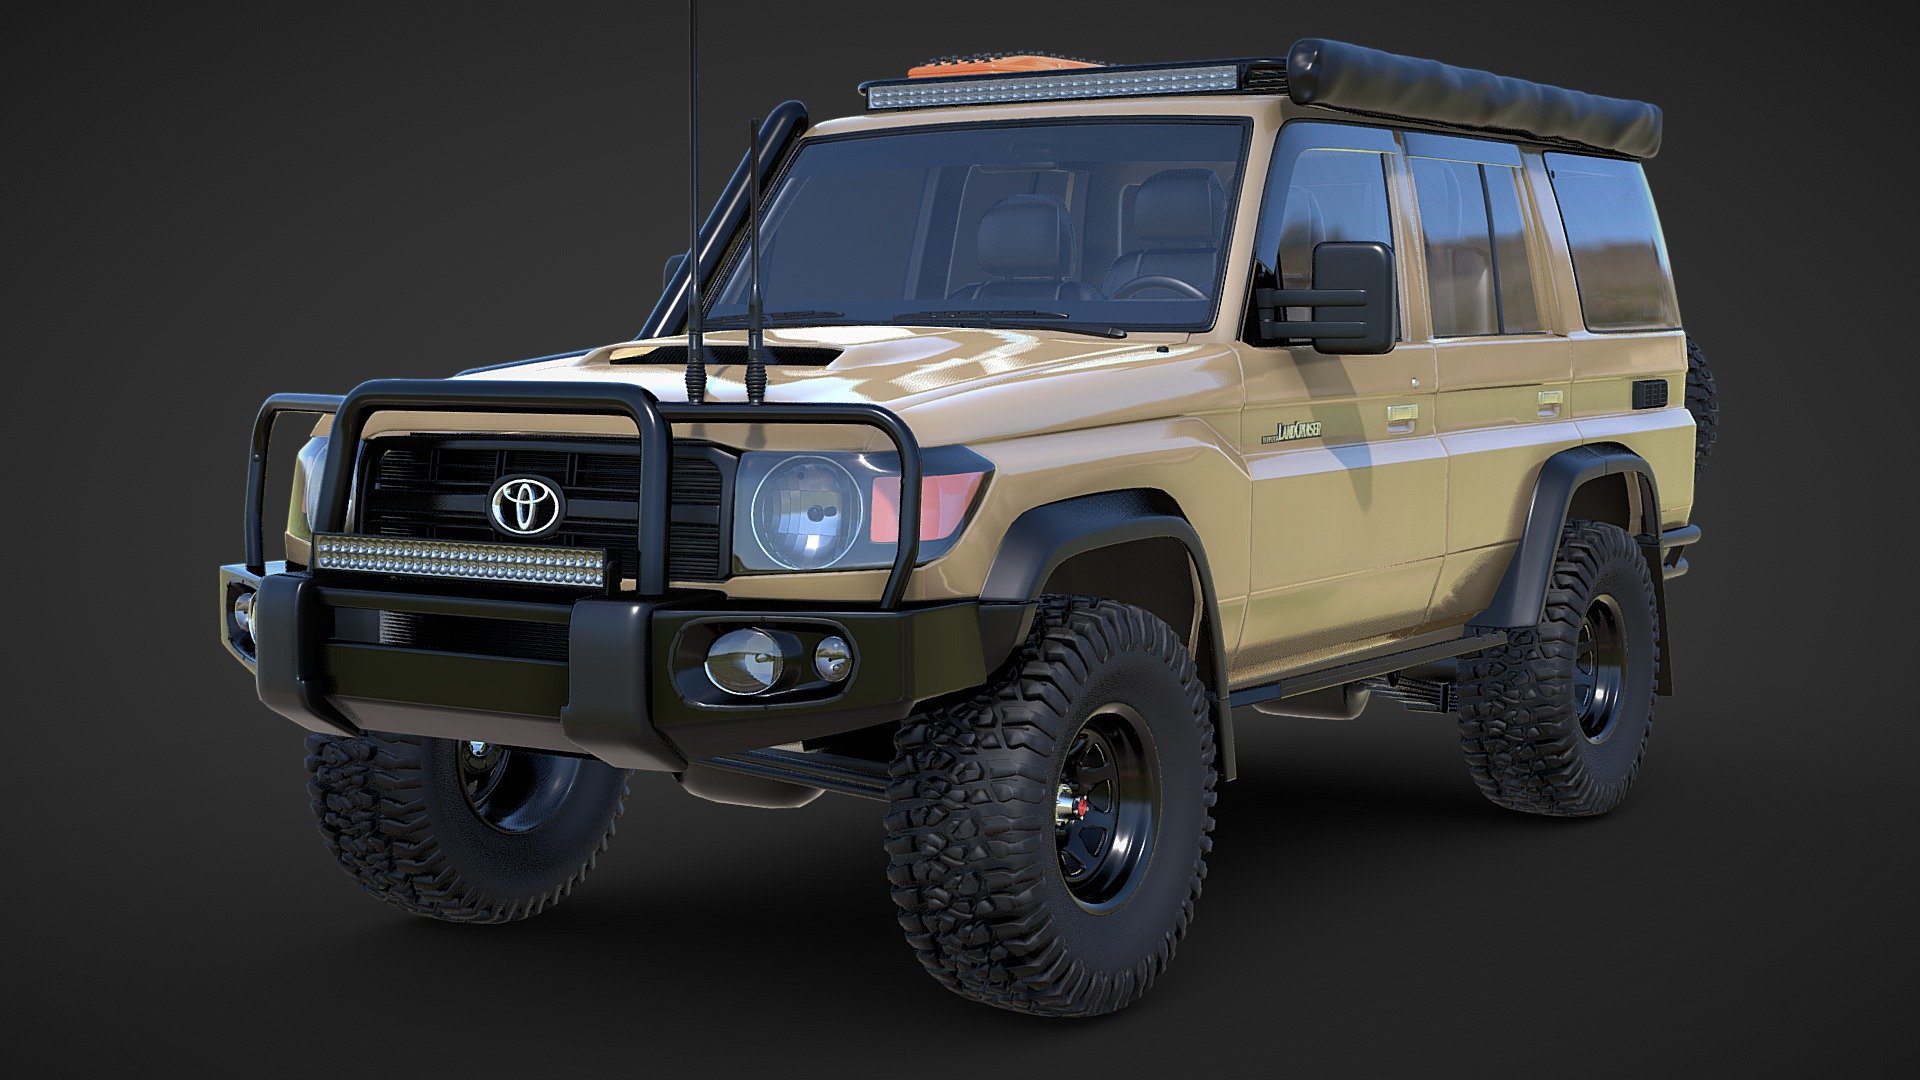 79 Series Single Cab Stock Variation - Toyota Land Cruiser 76 Series Wagon Touring - Buy Royalty Free 3D model by 4x4 Mania (@4x4Mania) 3d model